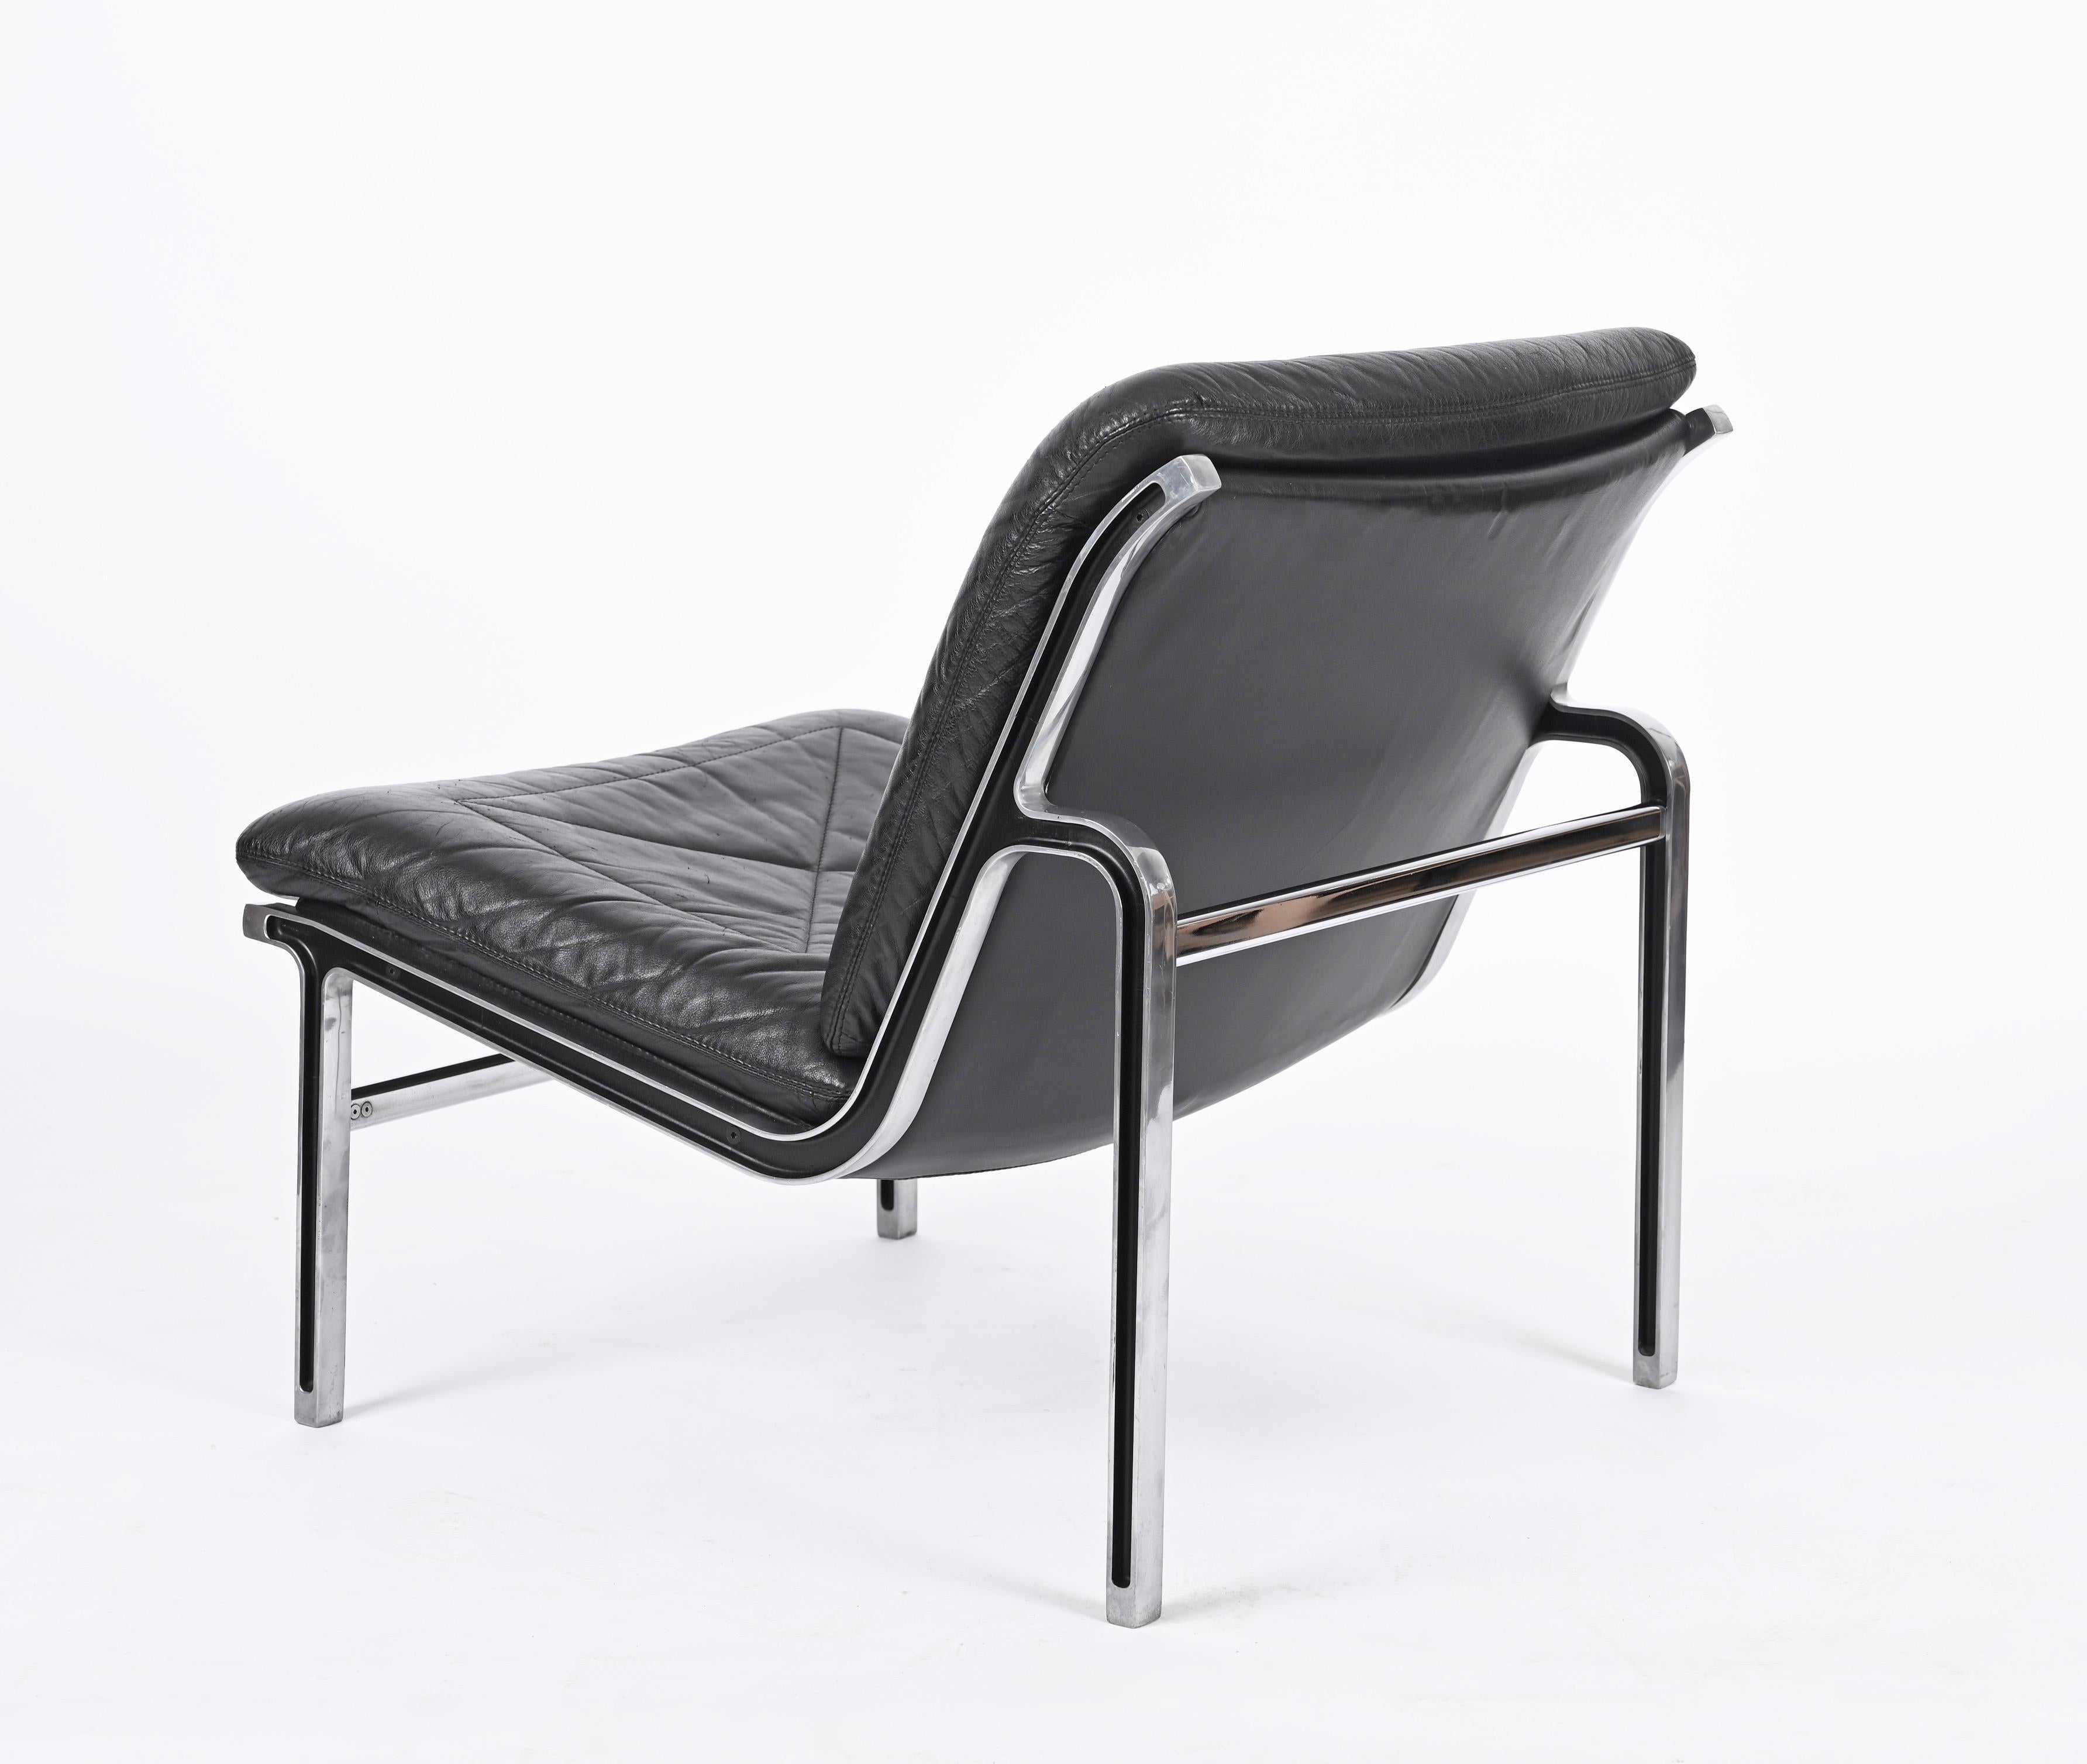 Metal Andre Vandenbeuck Pair of 'Aluline' Lounge Chairs in Black Leather, Swiss, 1960s For Sale